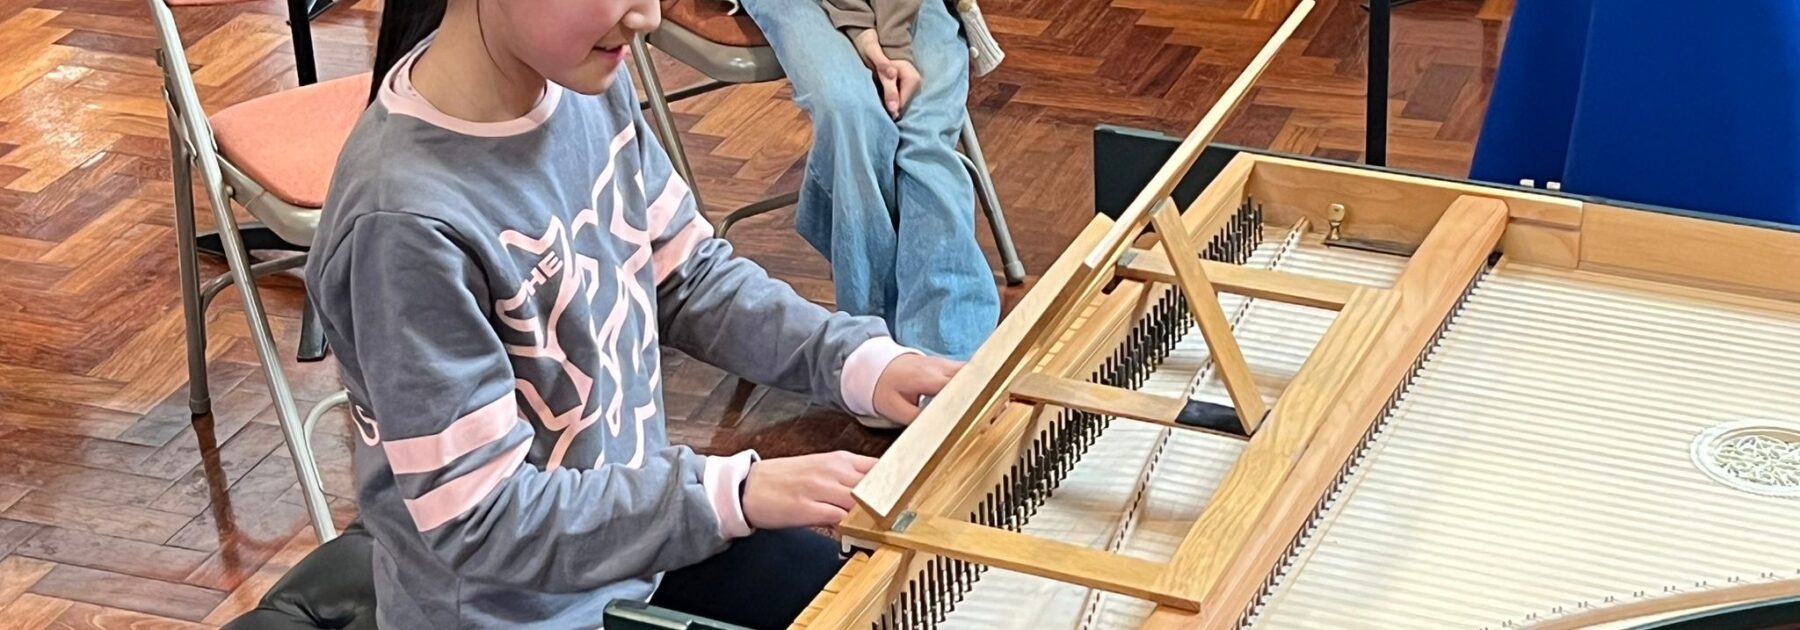 Pianists Try Out a Period Harpsichord